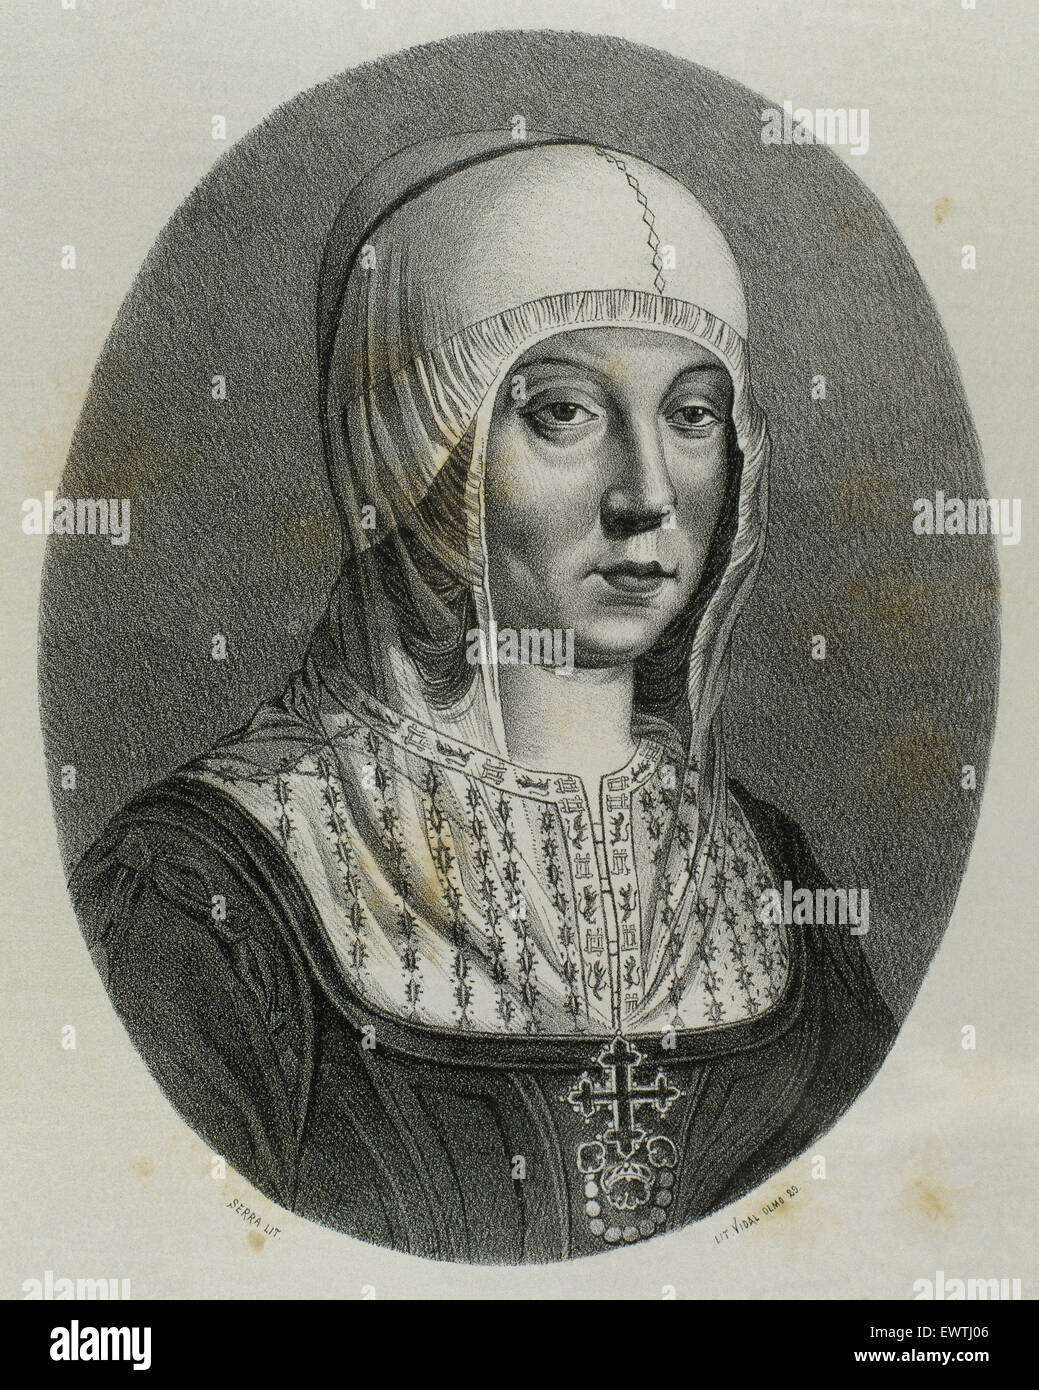 Isabella I of Castile (1451-1504). Queen of Castile. Engraving in Spain Illustrated History, 19th century. Stock Photo